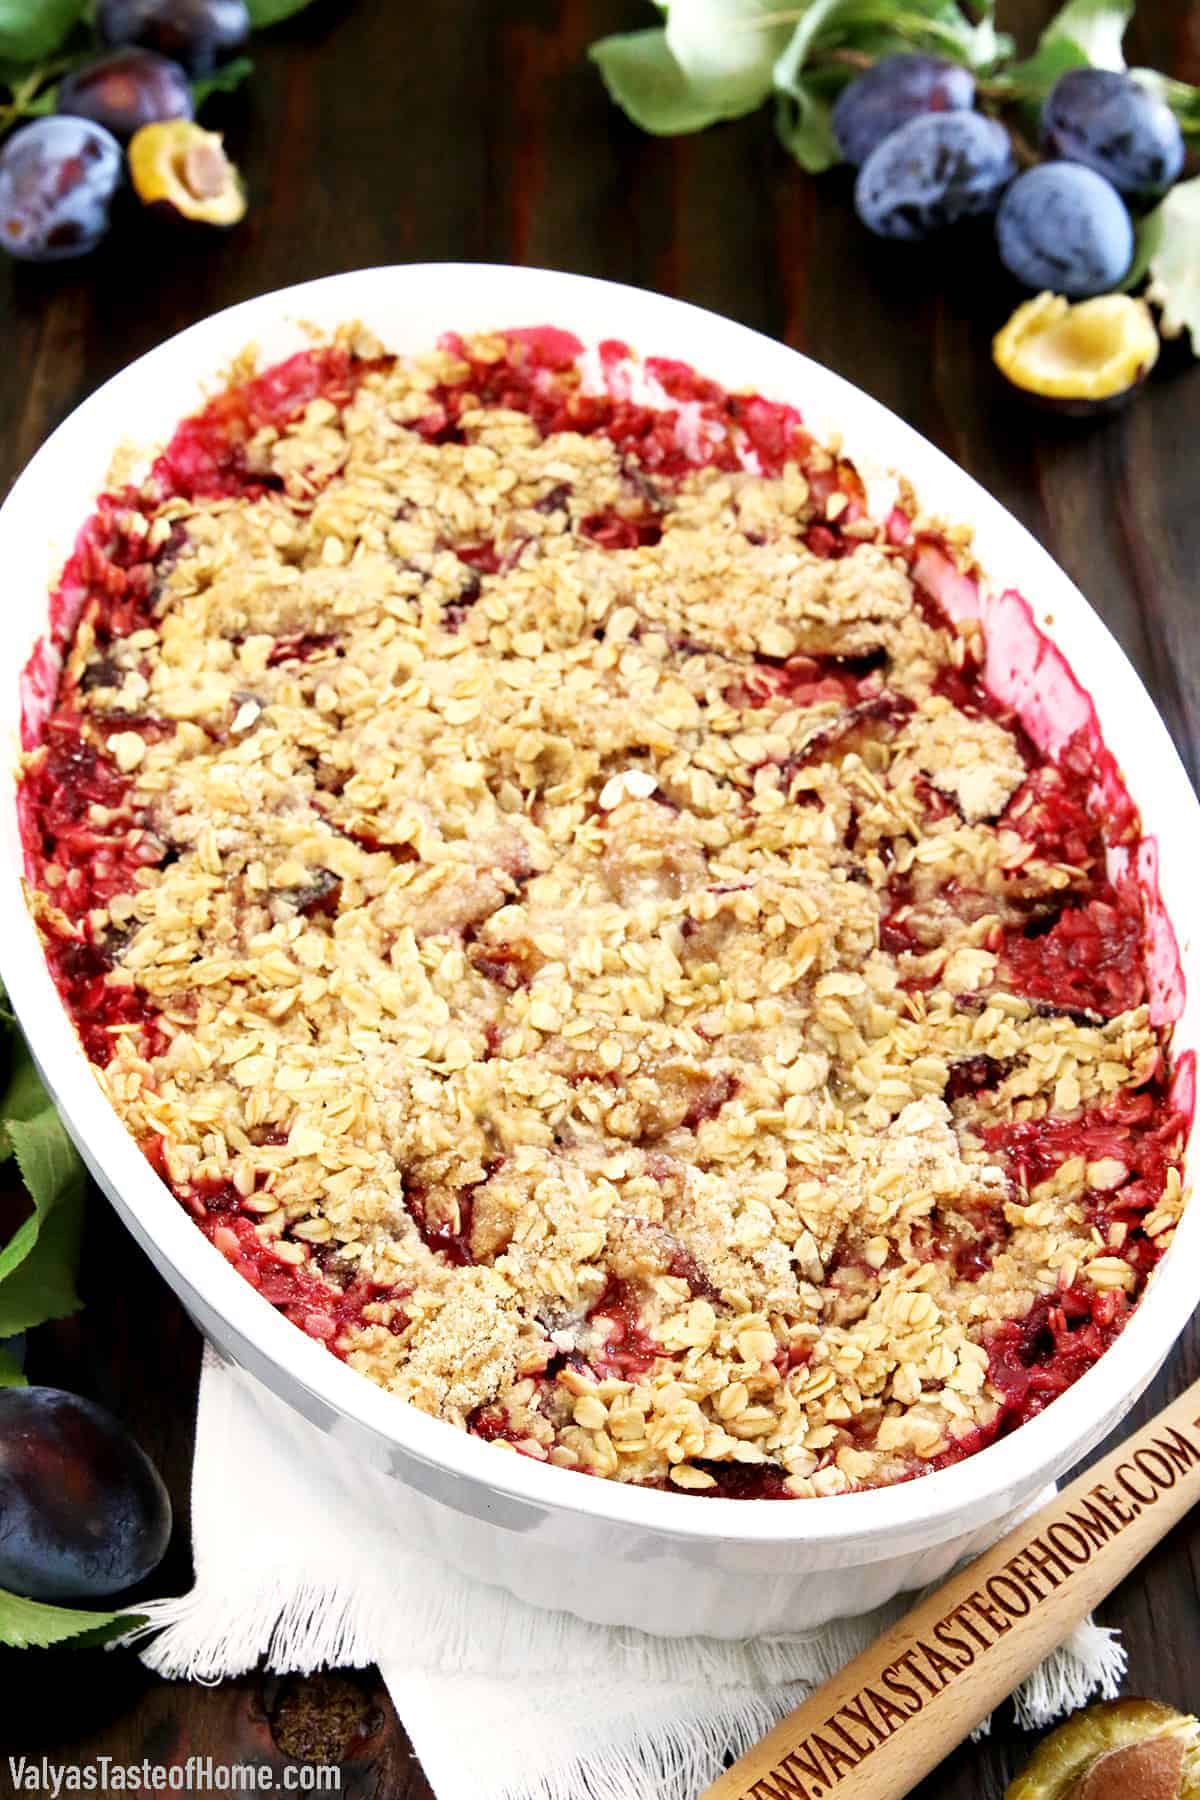 If your plum tree is overloaded with fruit and you don't know what to do with them, try this recipe out! This is The Best Plum Crisp Recipe you'll ever taste! The crunchy and delicious oats topping is guaranteed to leave you wanting more. 